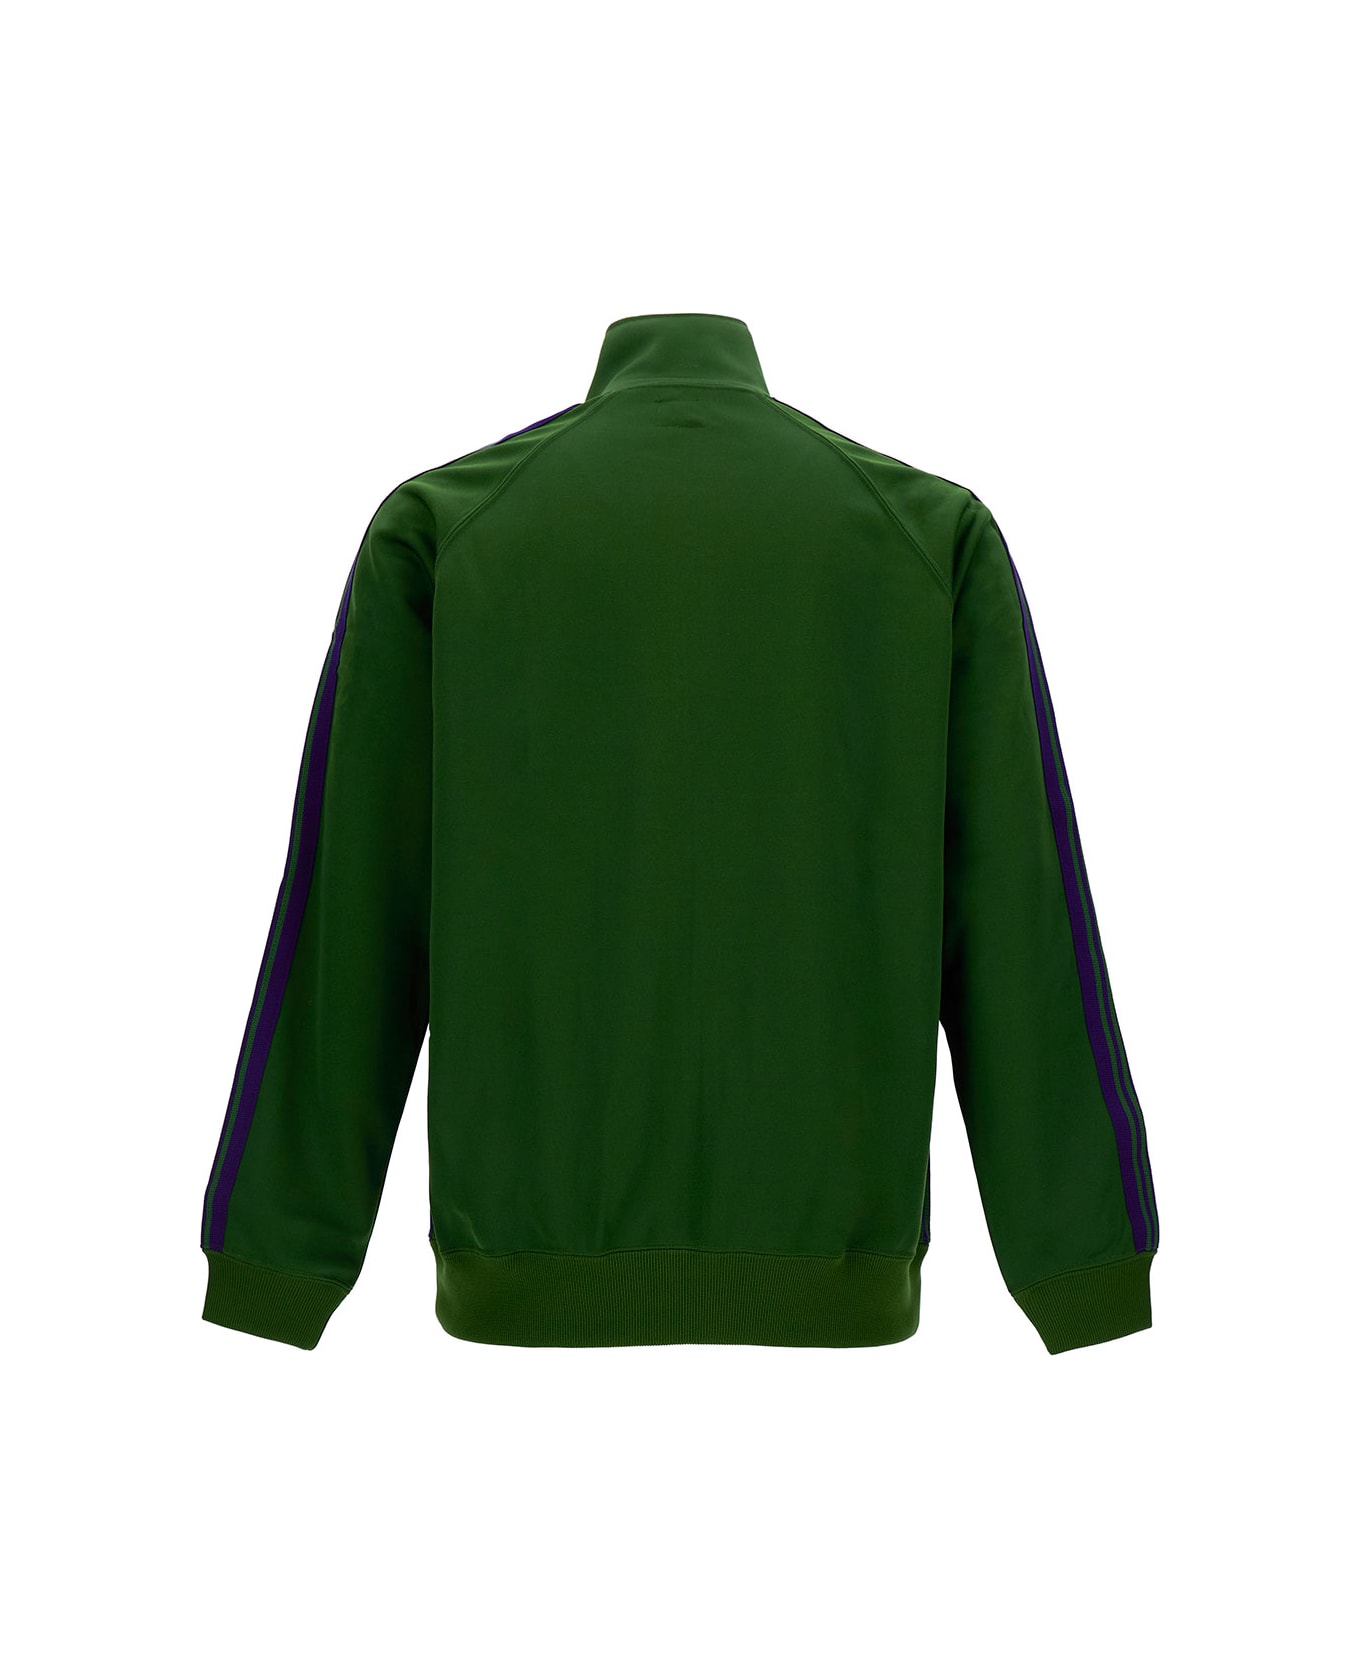 Needles Green High-neck Sweatshirt With Logo Embroidery In Tech Fabric Man - Green ニットウェア